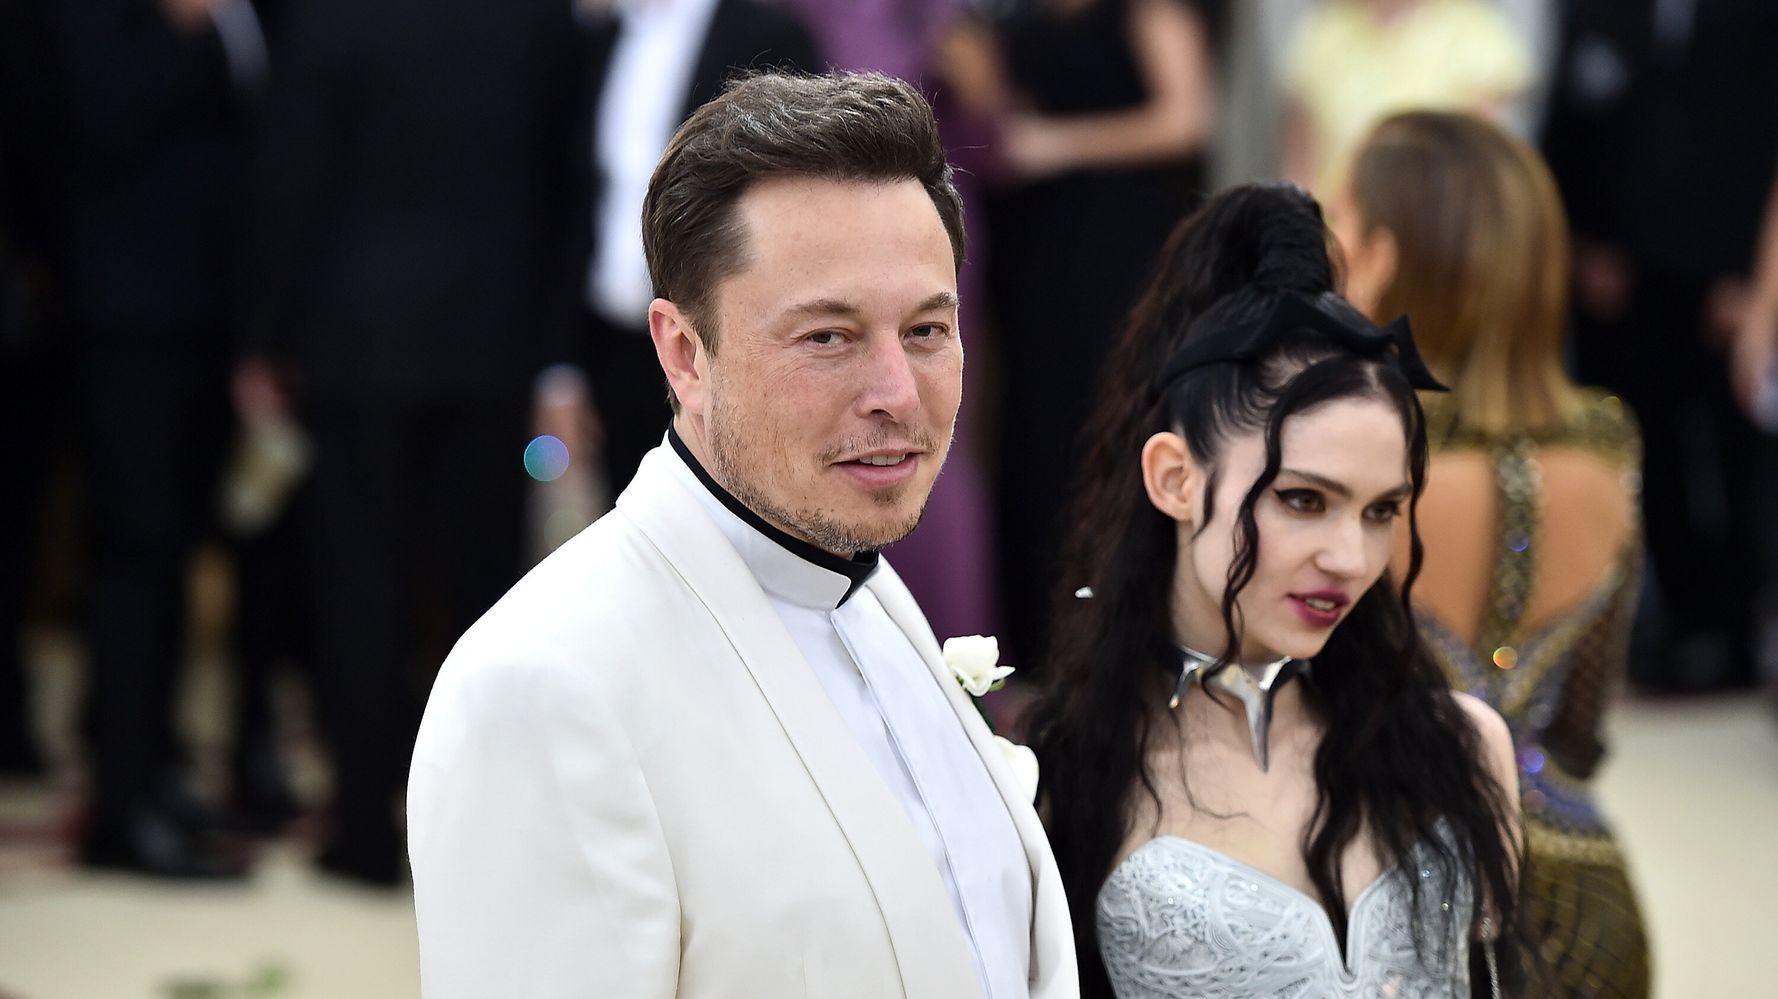 Elon Musk And Grimes Split Up After 3 Years, 1 Child